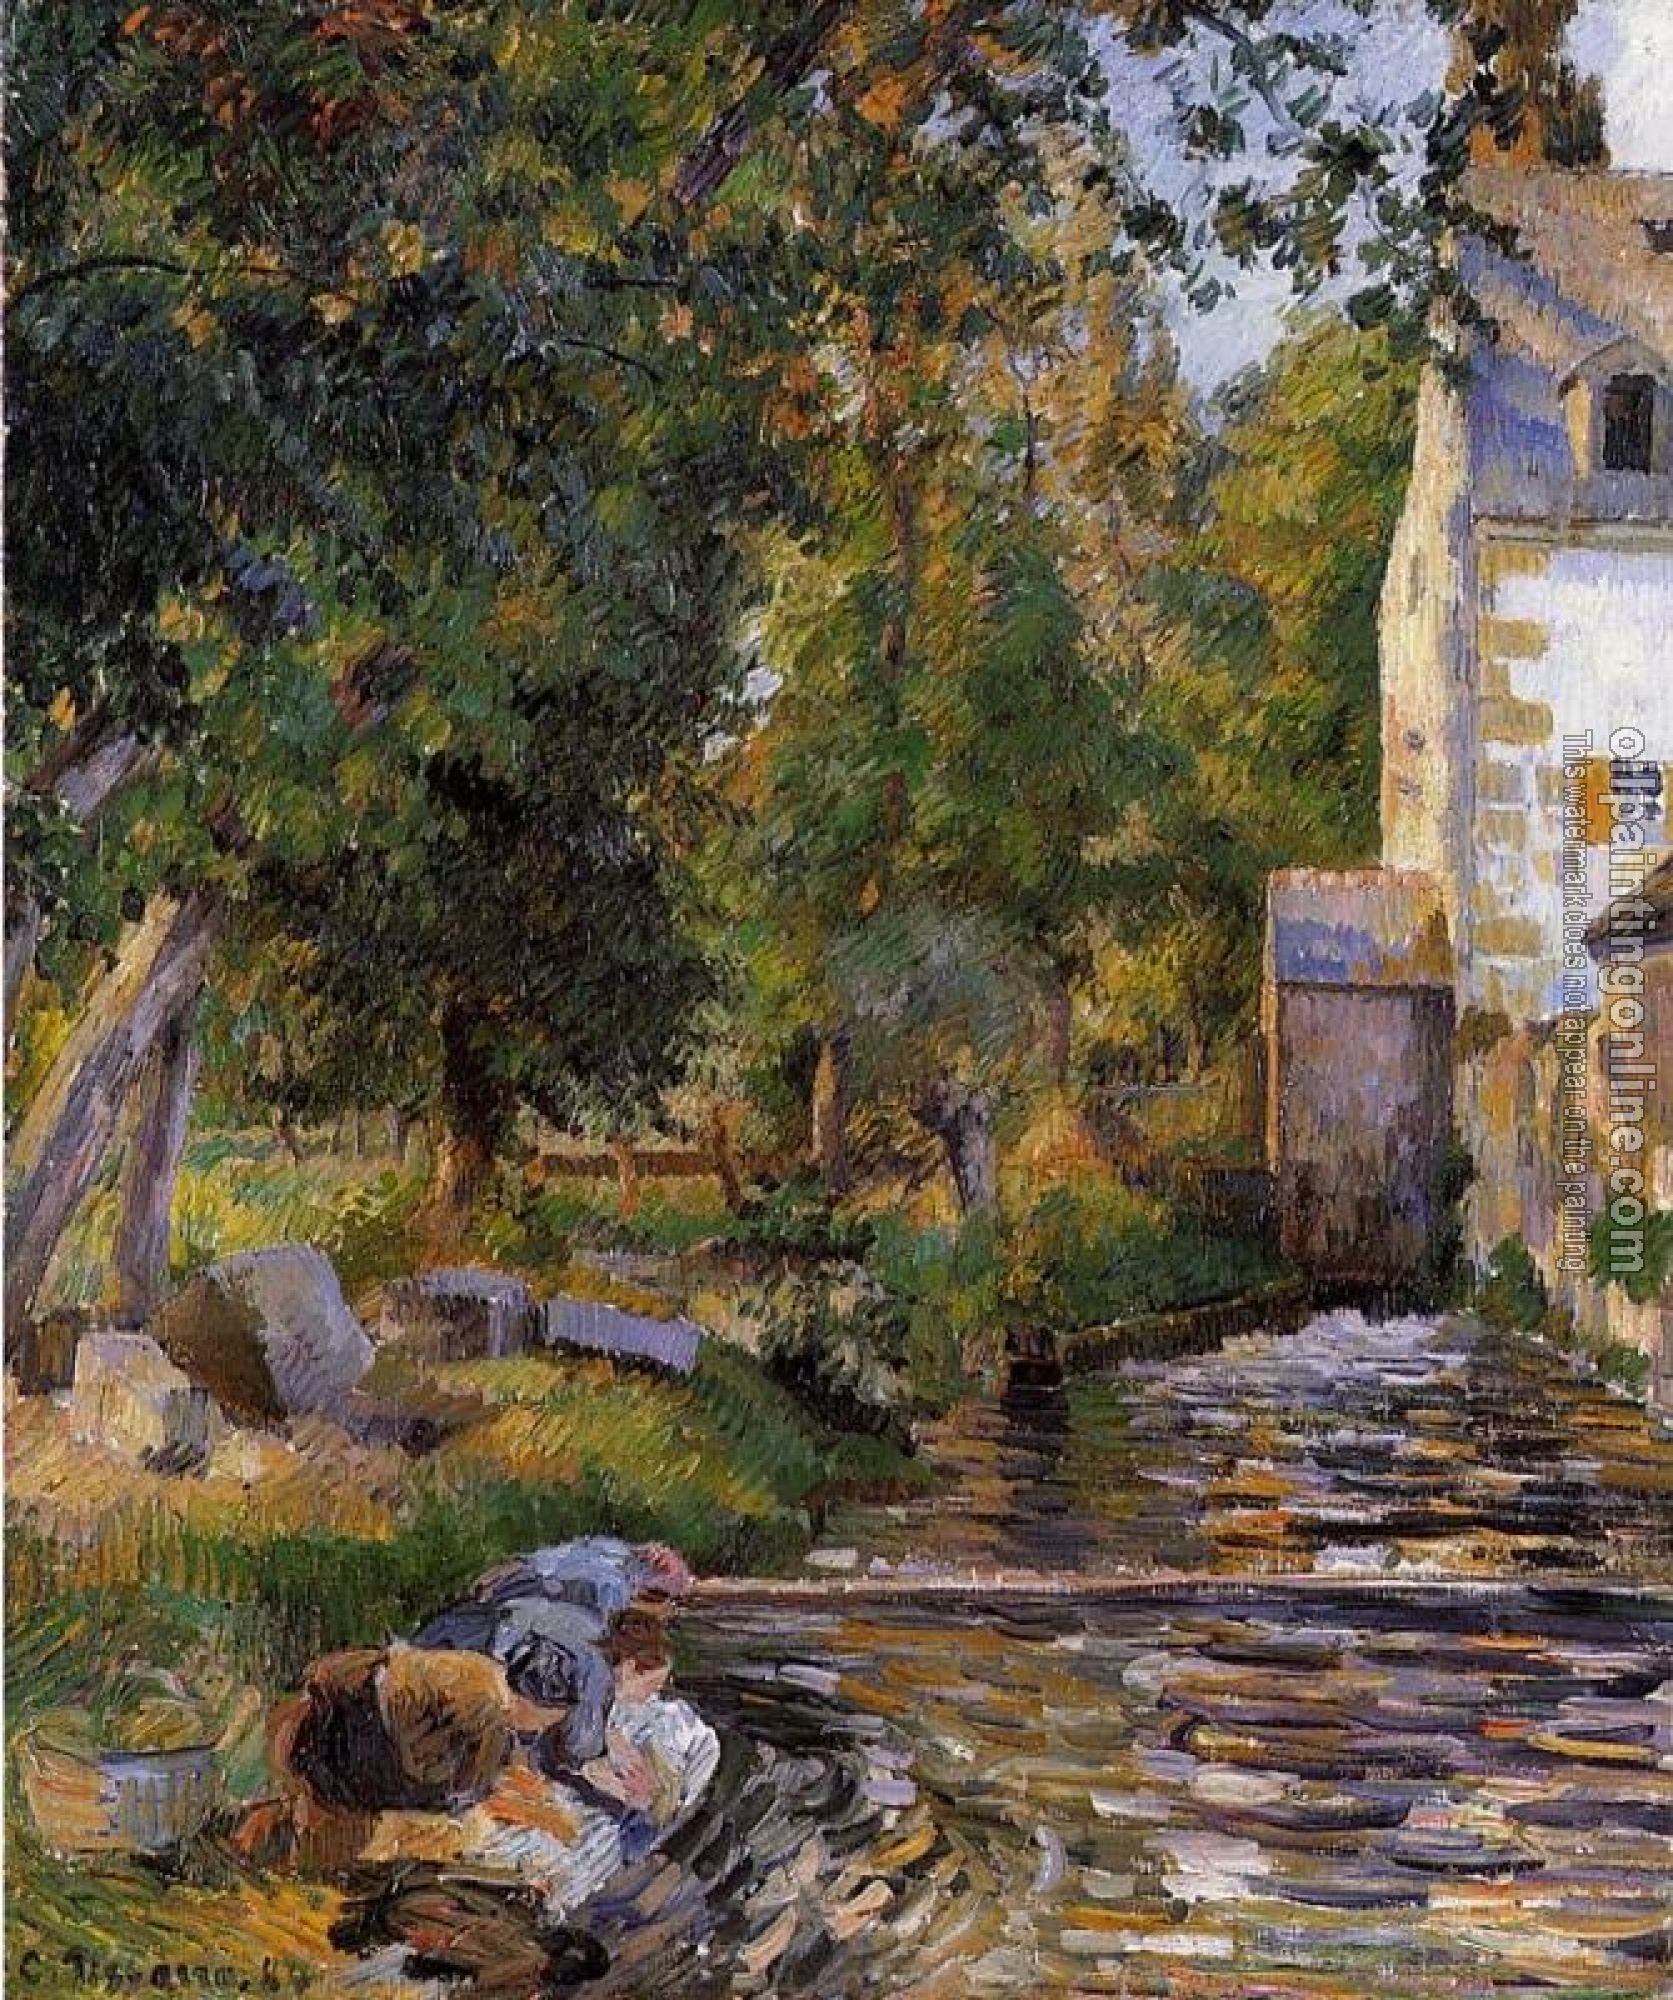 Pissarro, Camille - Laundry and Mill at Osny